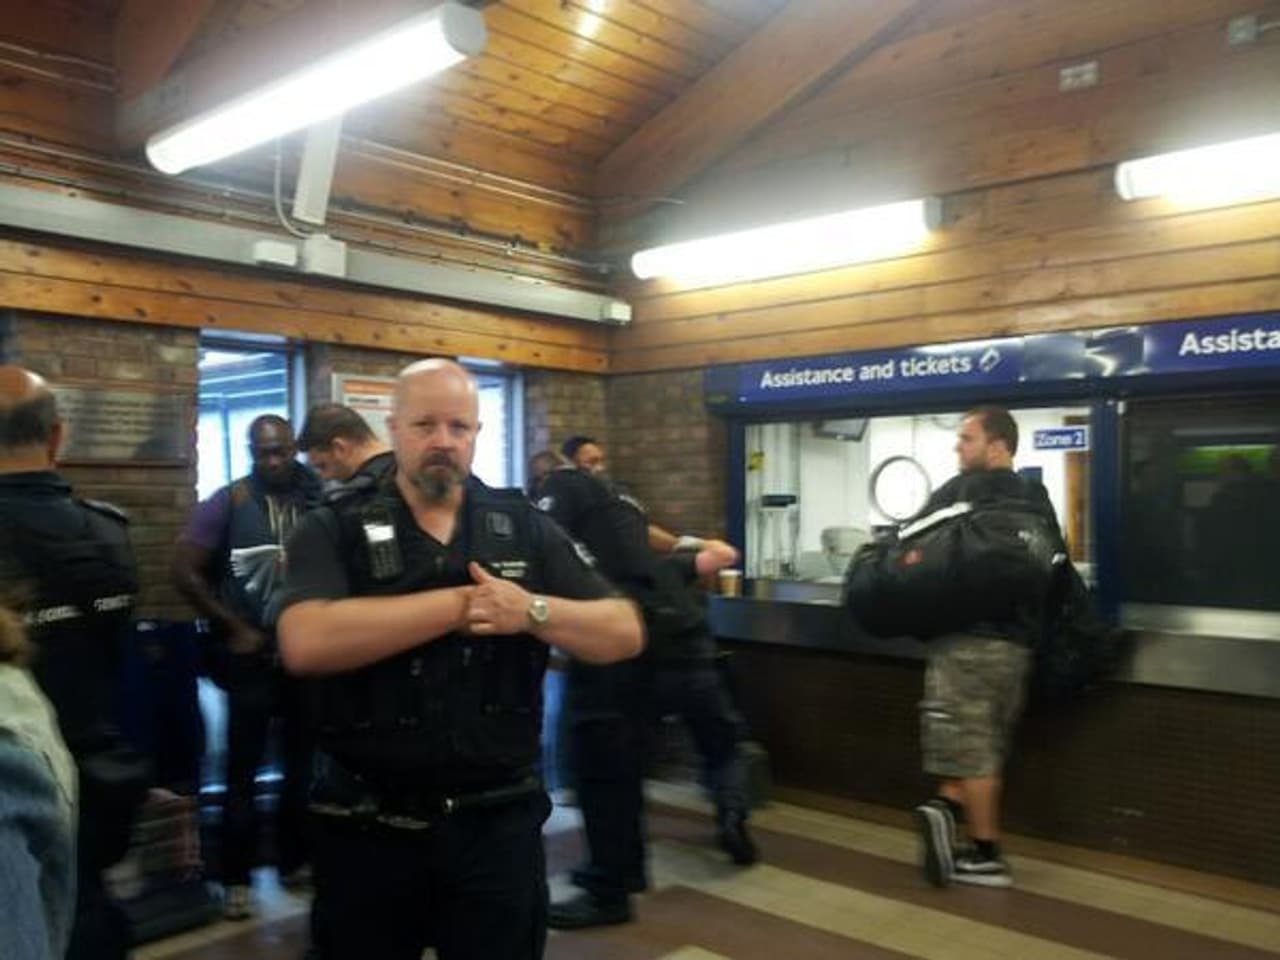 An image of an immigration raid at a London tube station